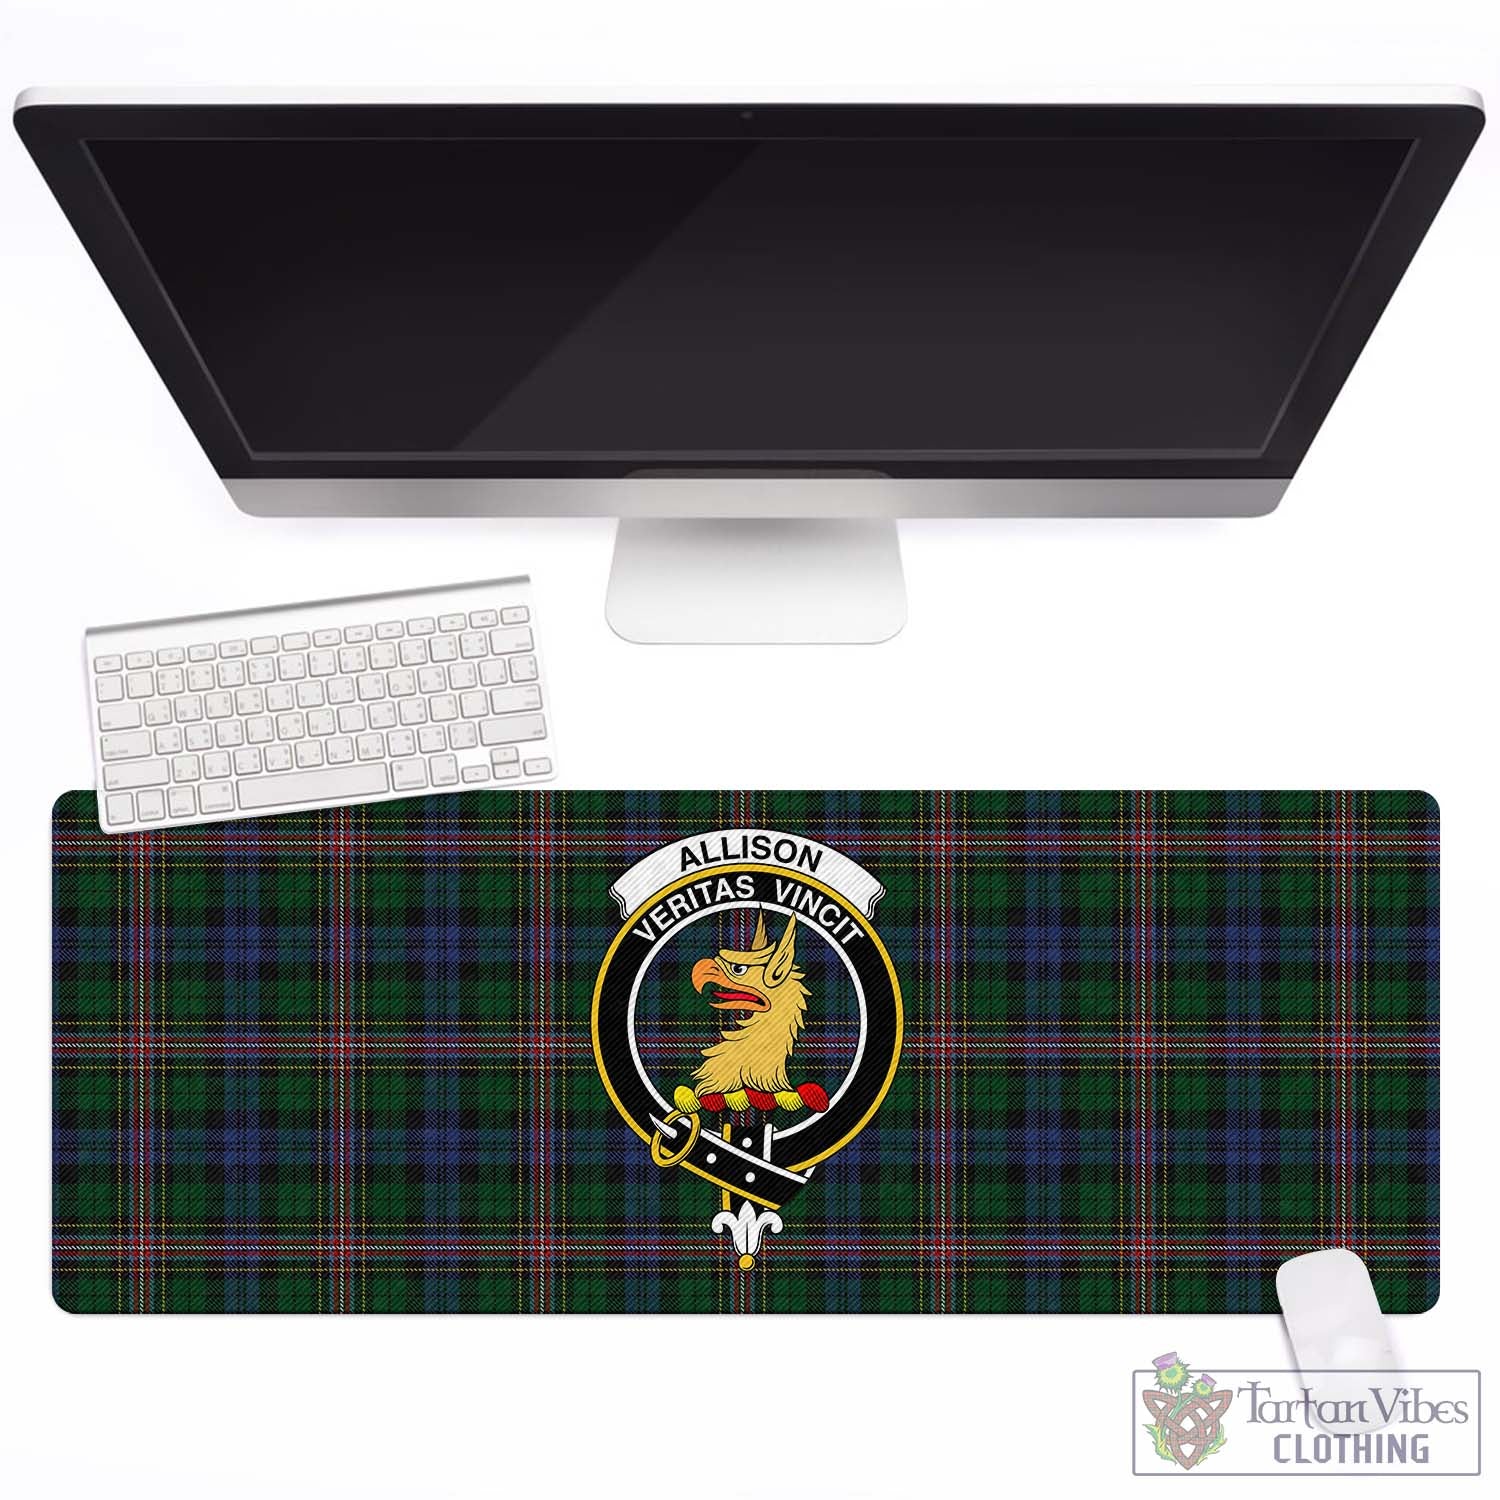 Tartan Vibes Clothing Allison Tartan Mouse Pad with Family Crest